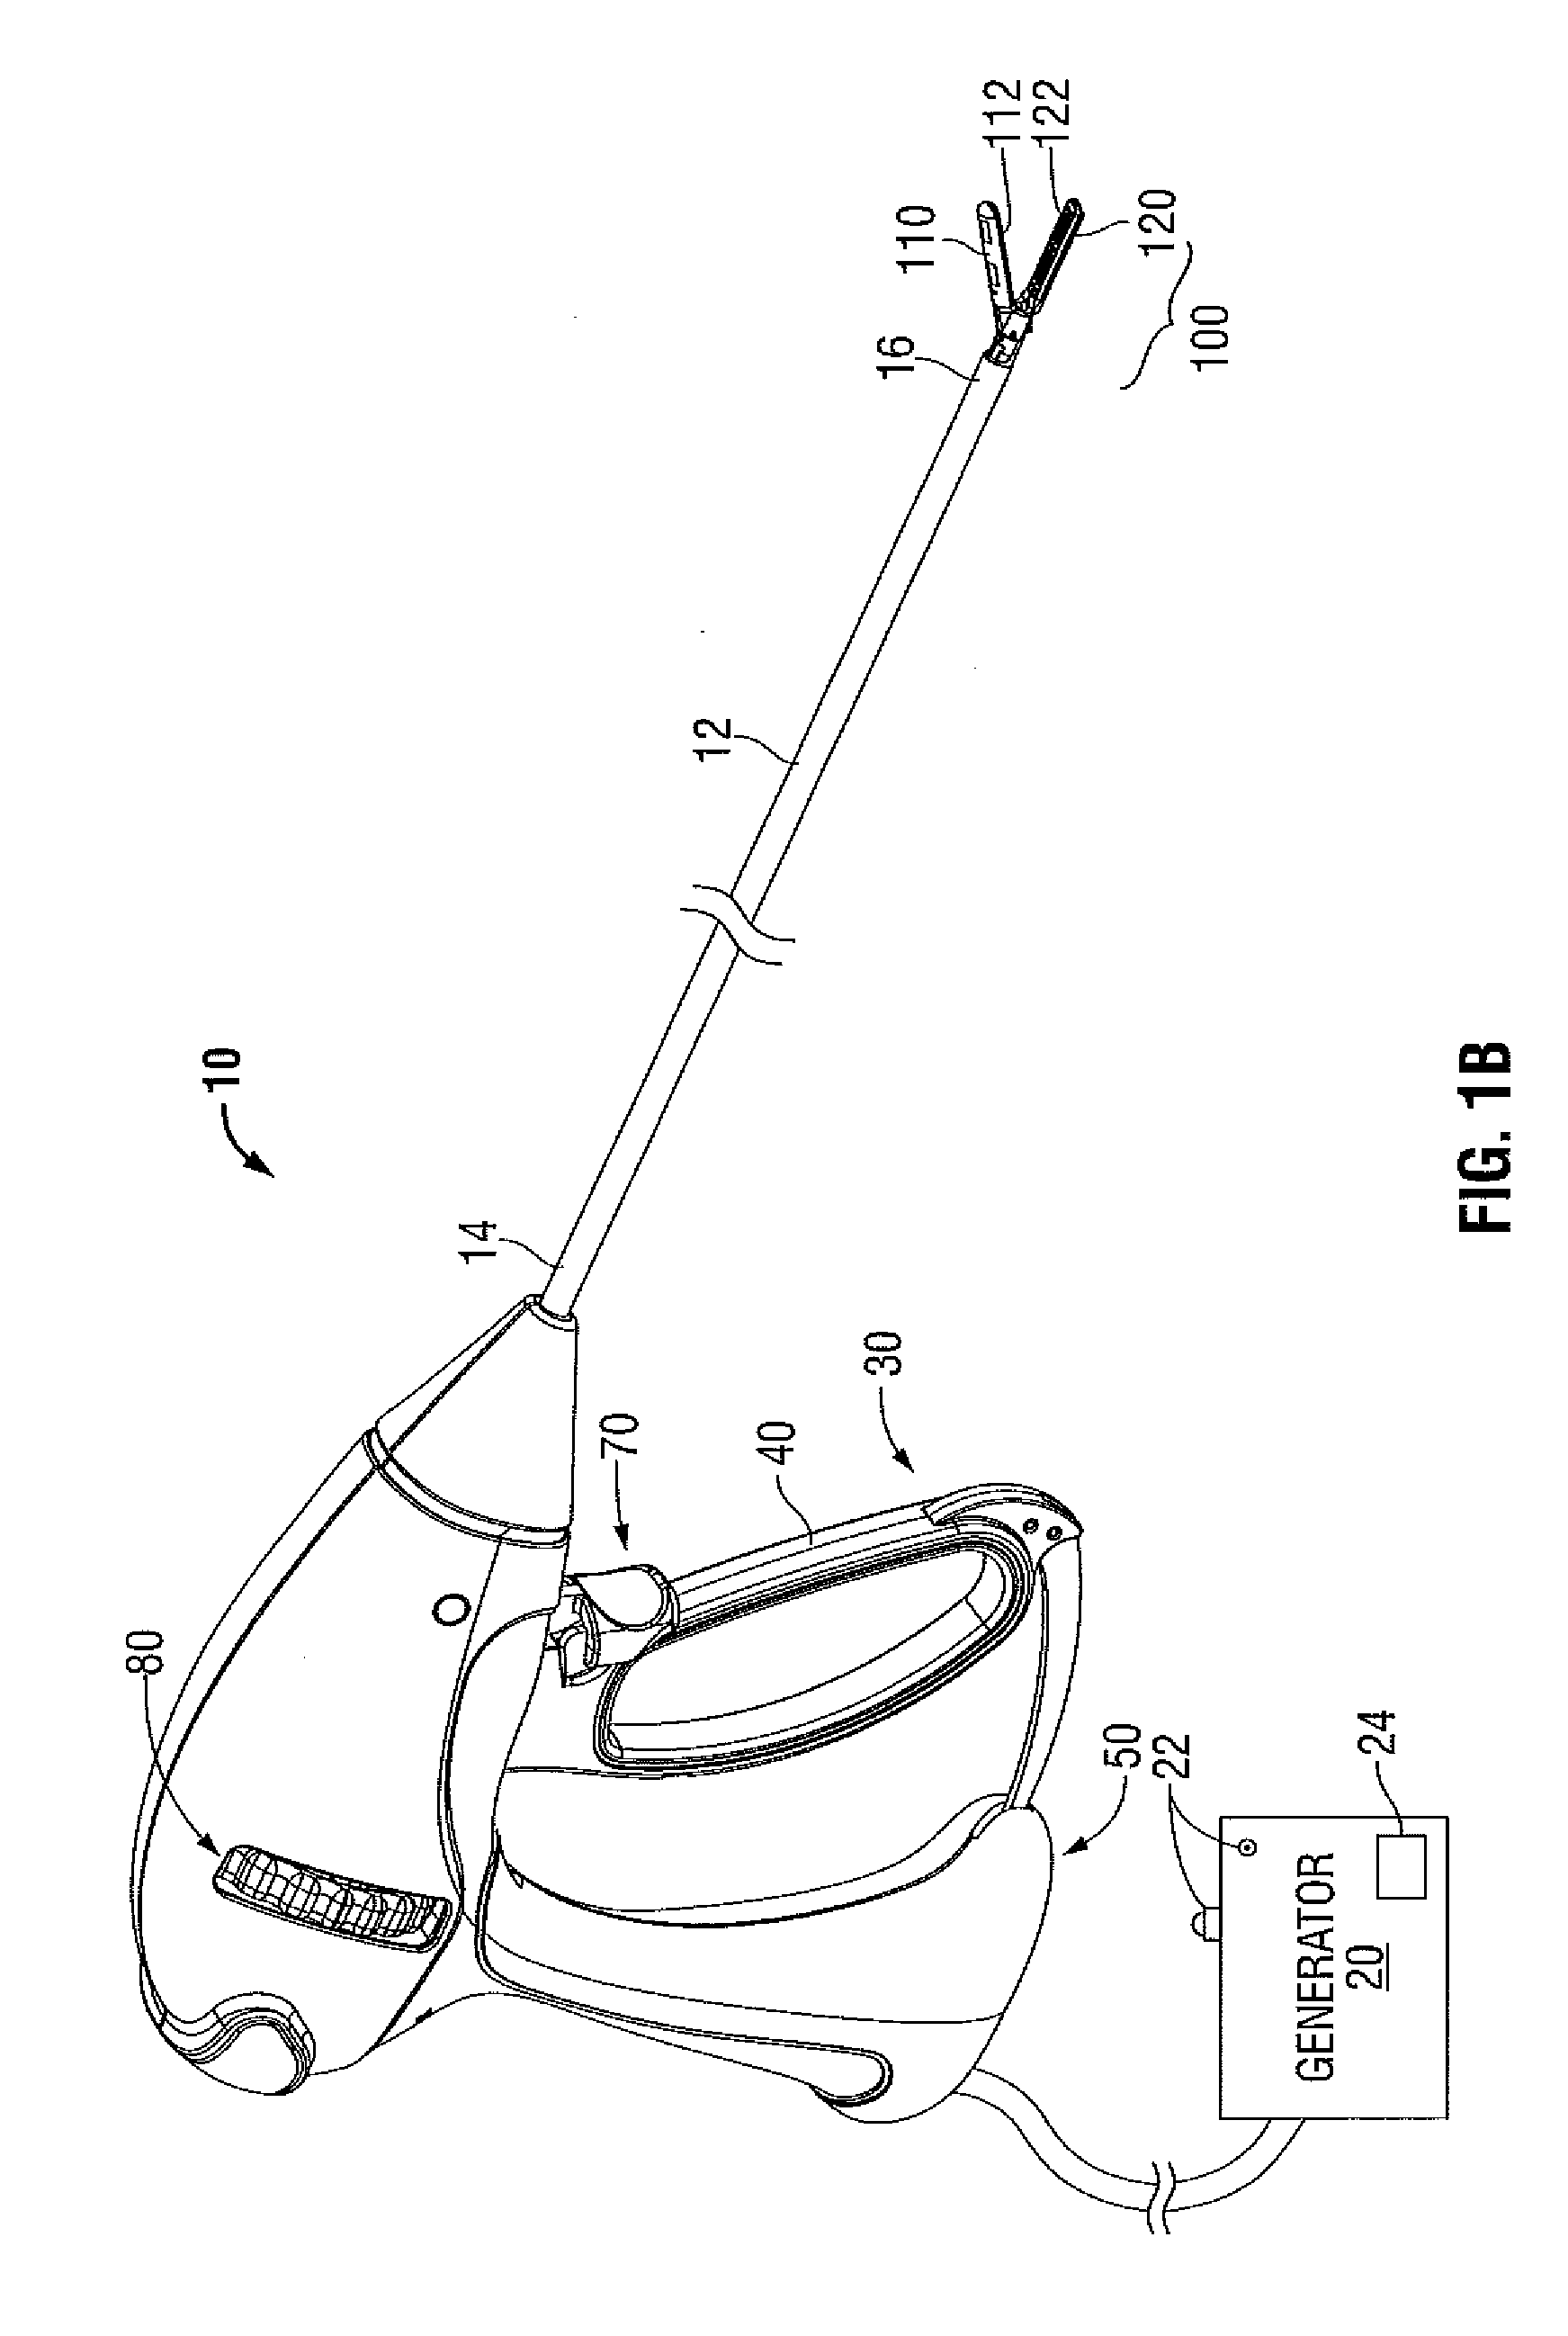 System and Method for Determining Proximity Relative to a Nerve